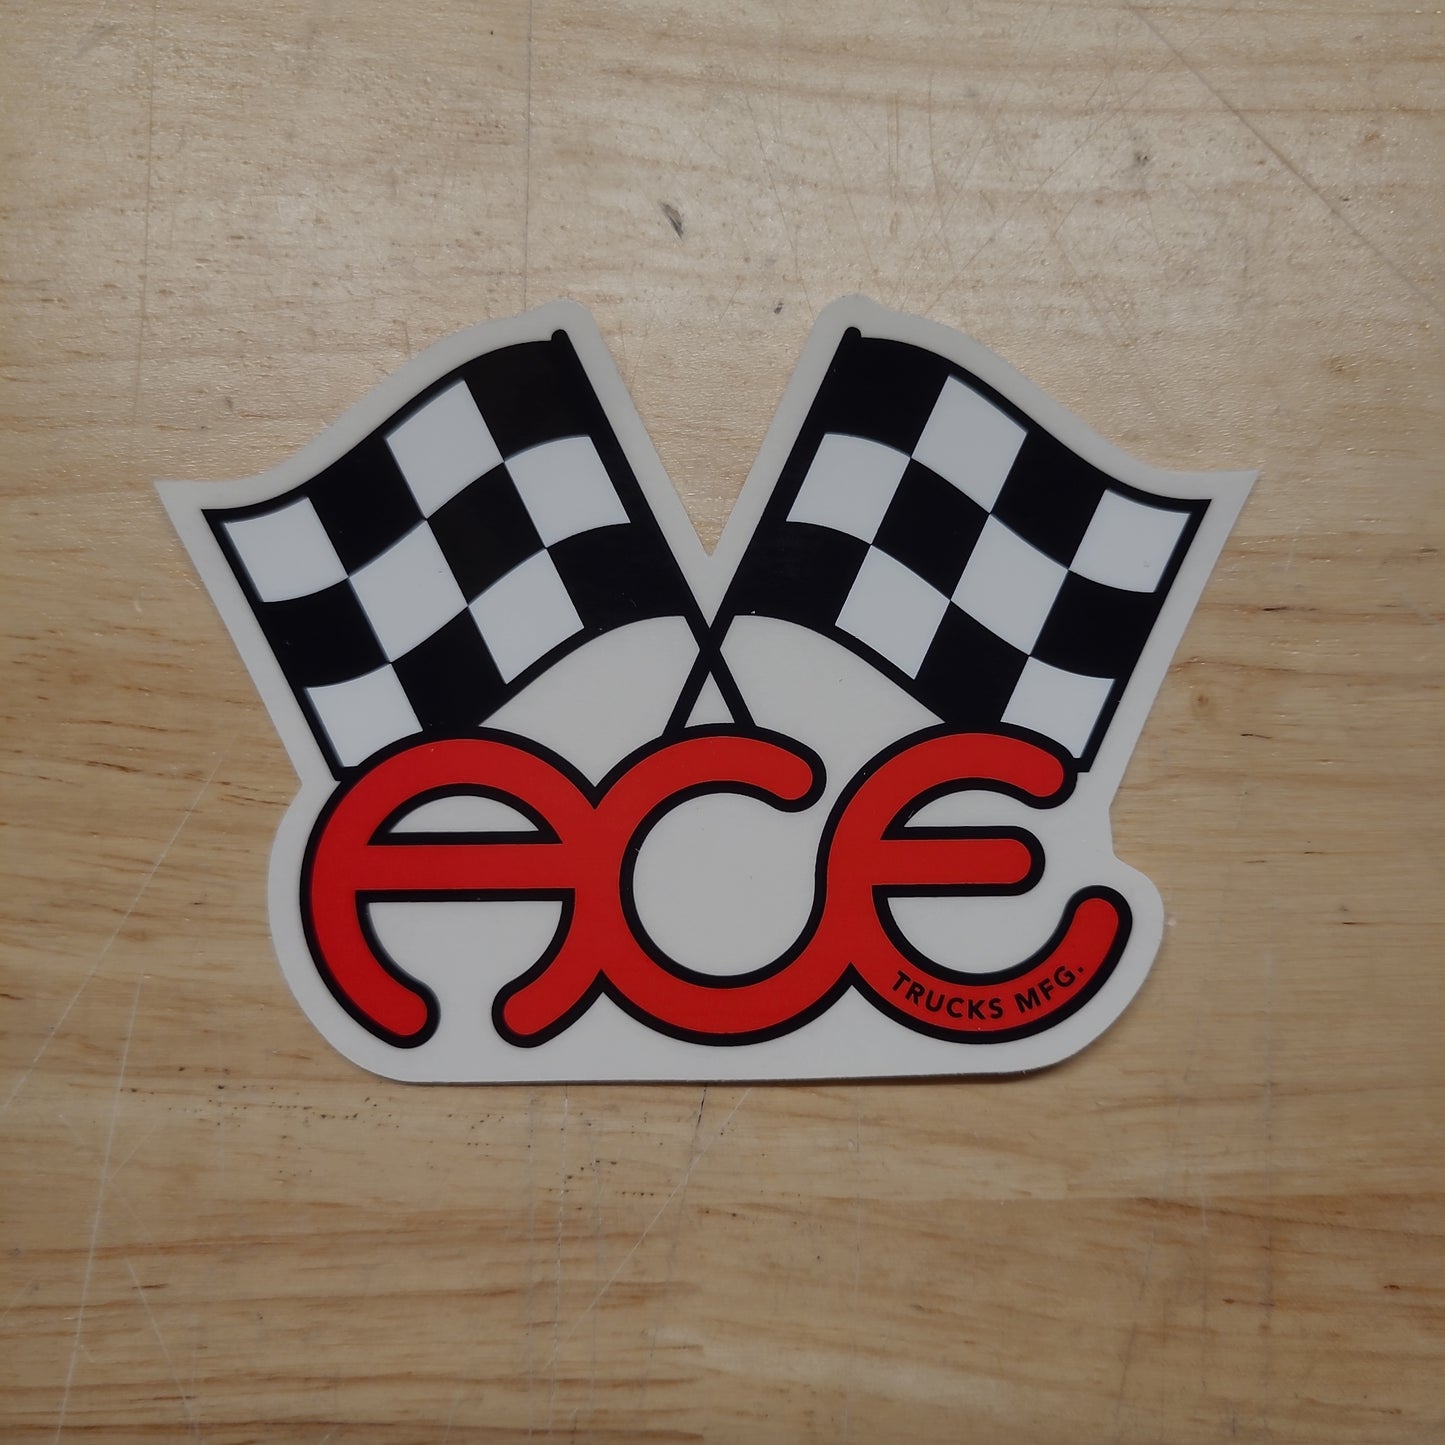 Ace Trucks - Assorted Graphic Stickers